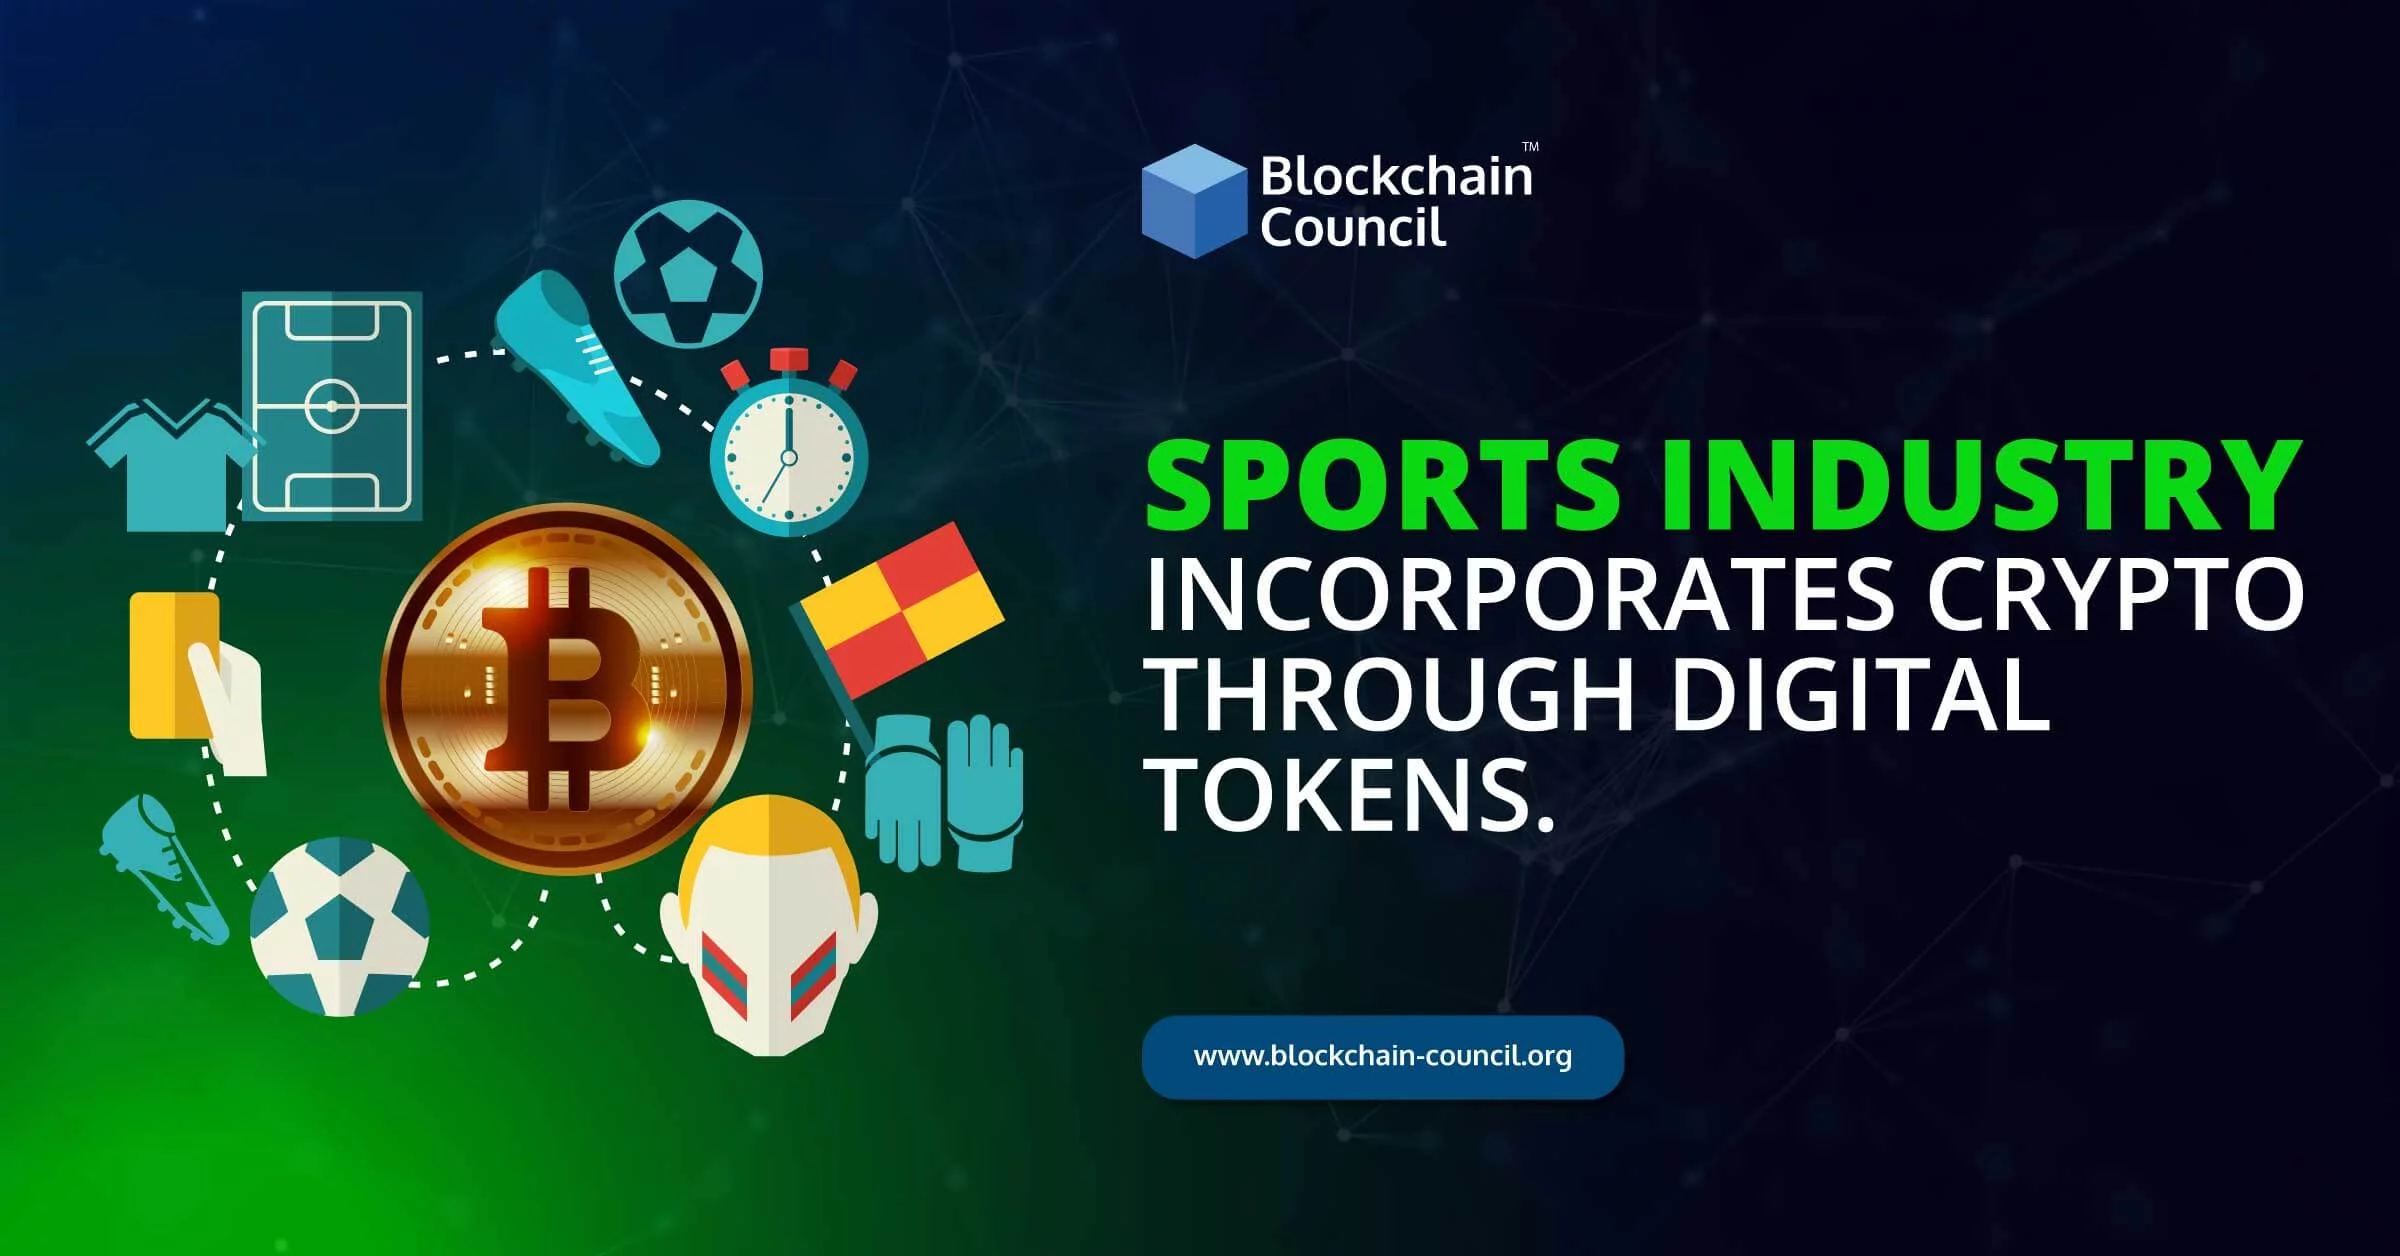 Sports Industry Incorporates Crypto Through Digital Tokens